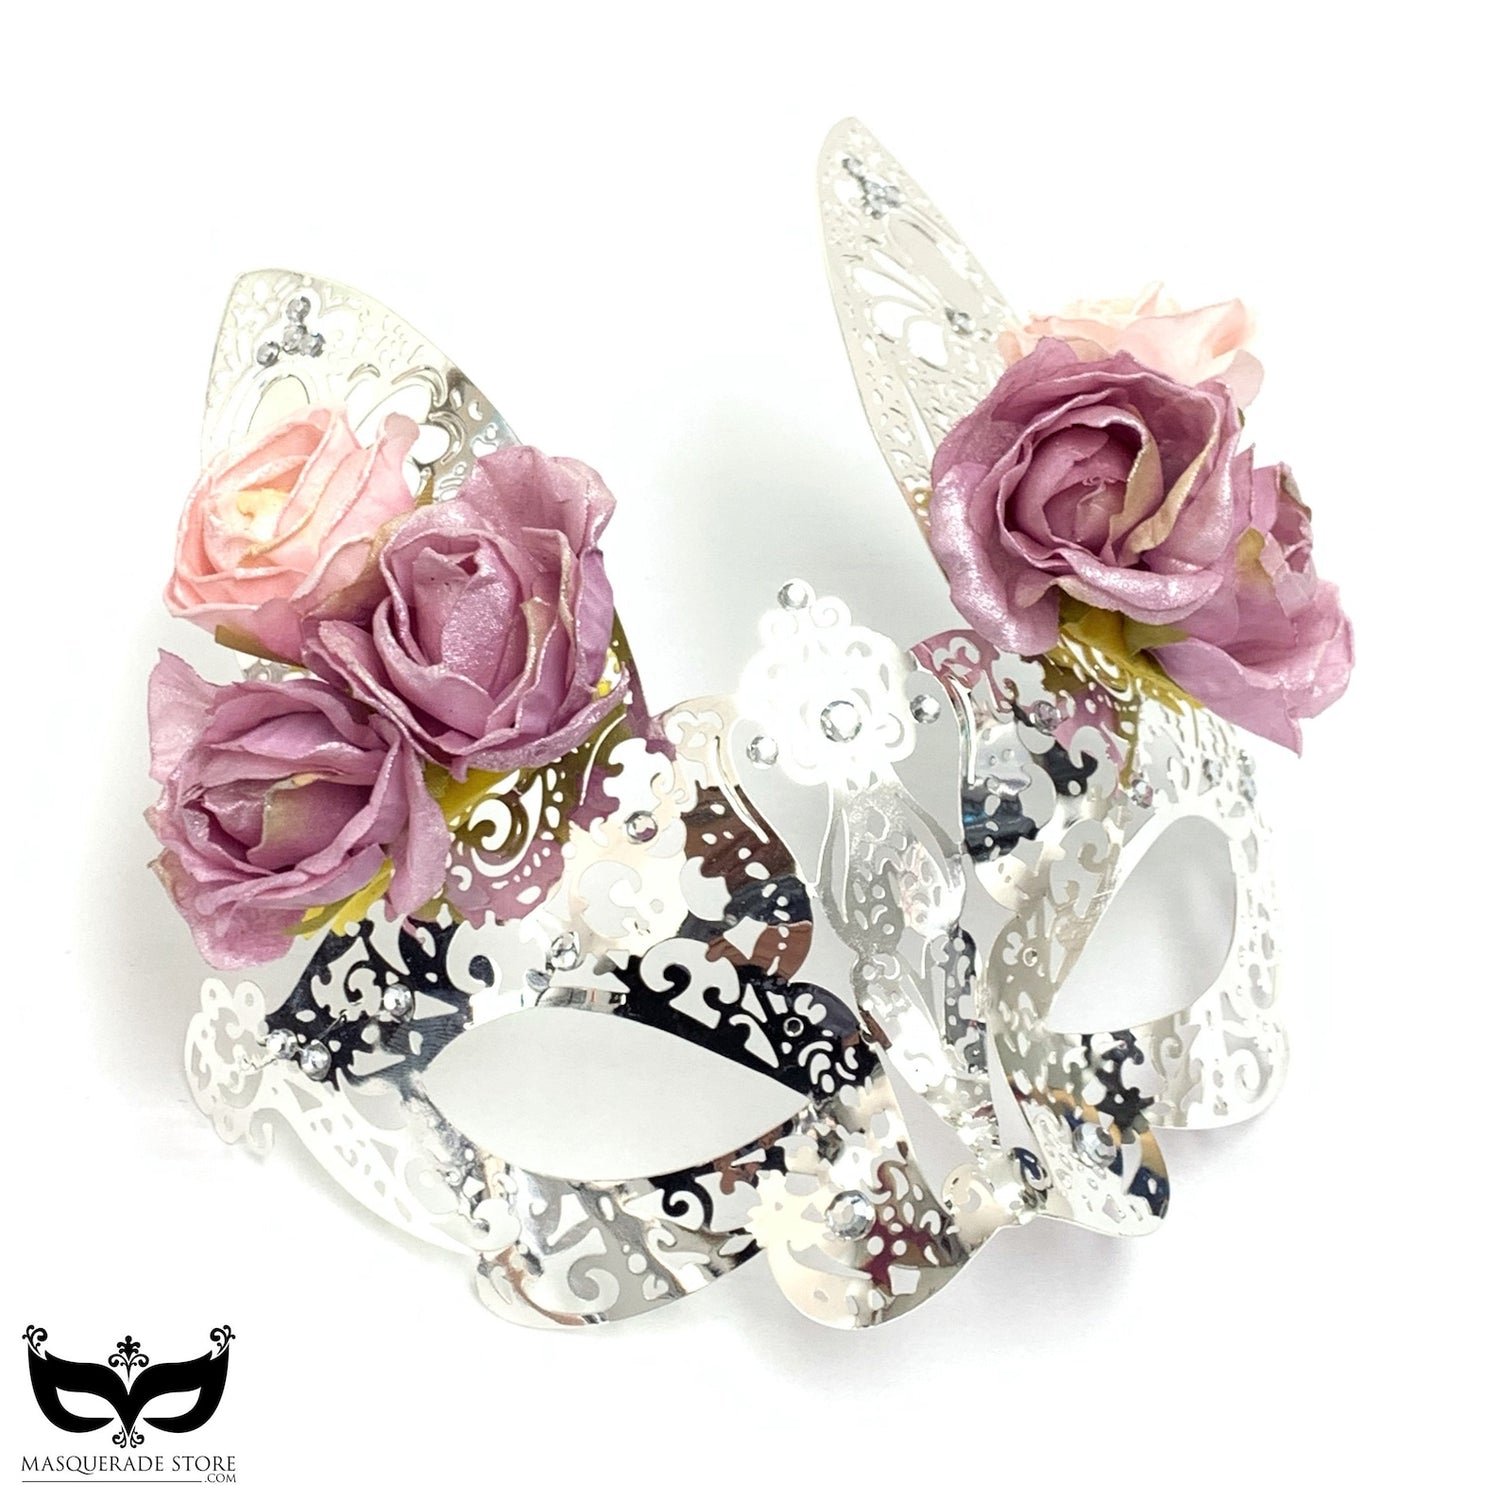 Silver metal bunny masquerade mask for kids with roses and rhinestones.